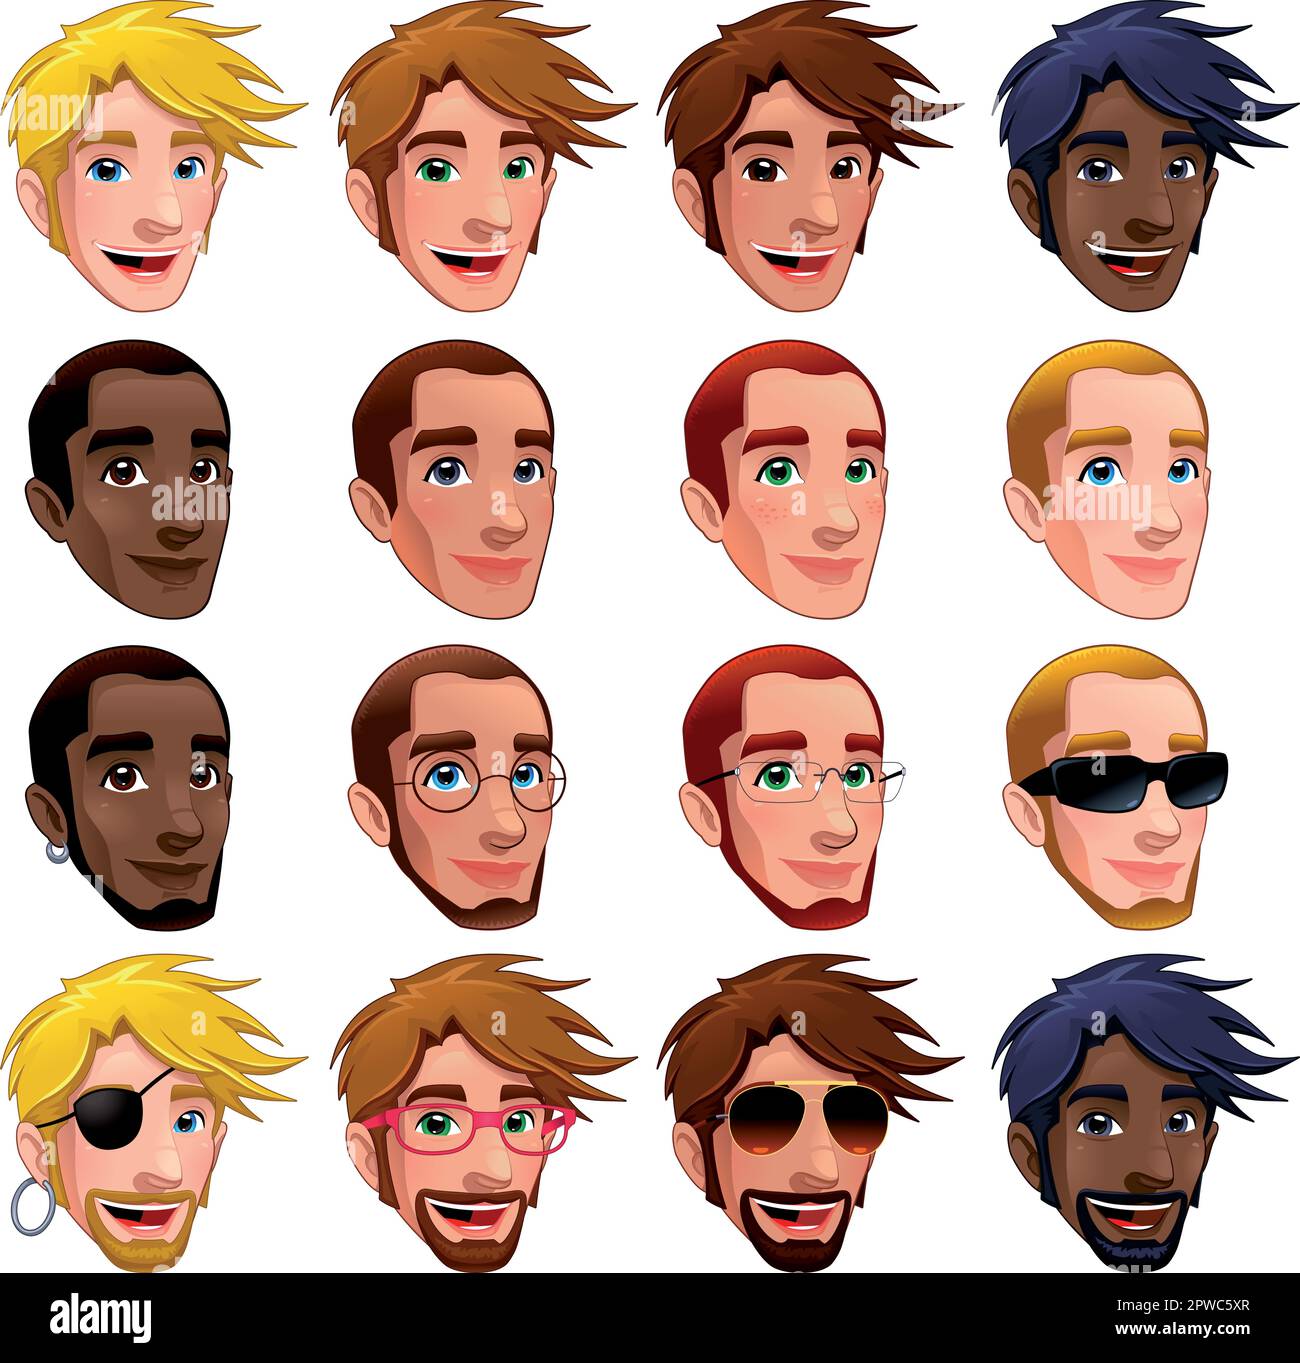 Male faces, vector isolated characters. Glasses, sunglasses and earrings are isolated and interchangeable. Stock Vector